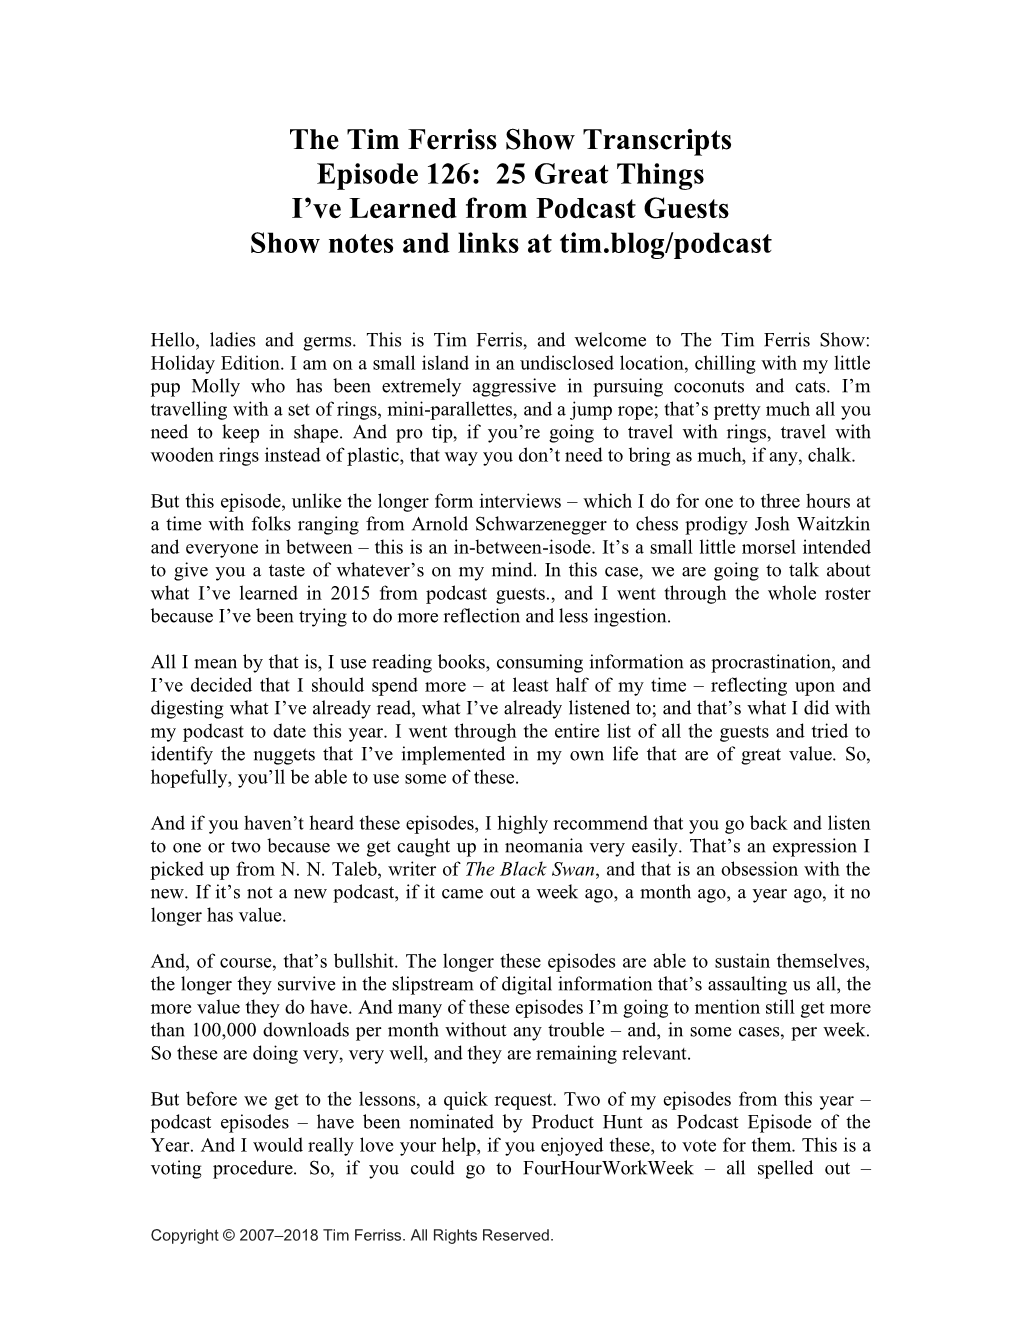 The Tim Ferriss Show Transcripts Episode 126: 25 Great Things I've